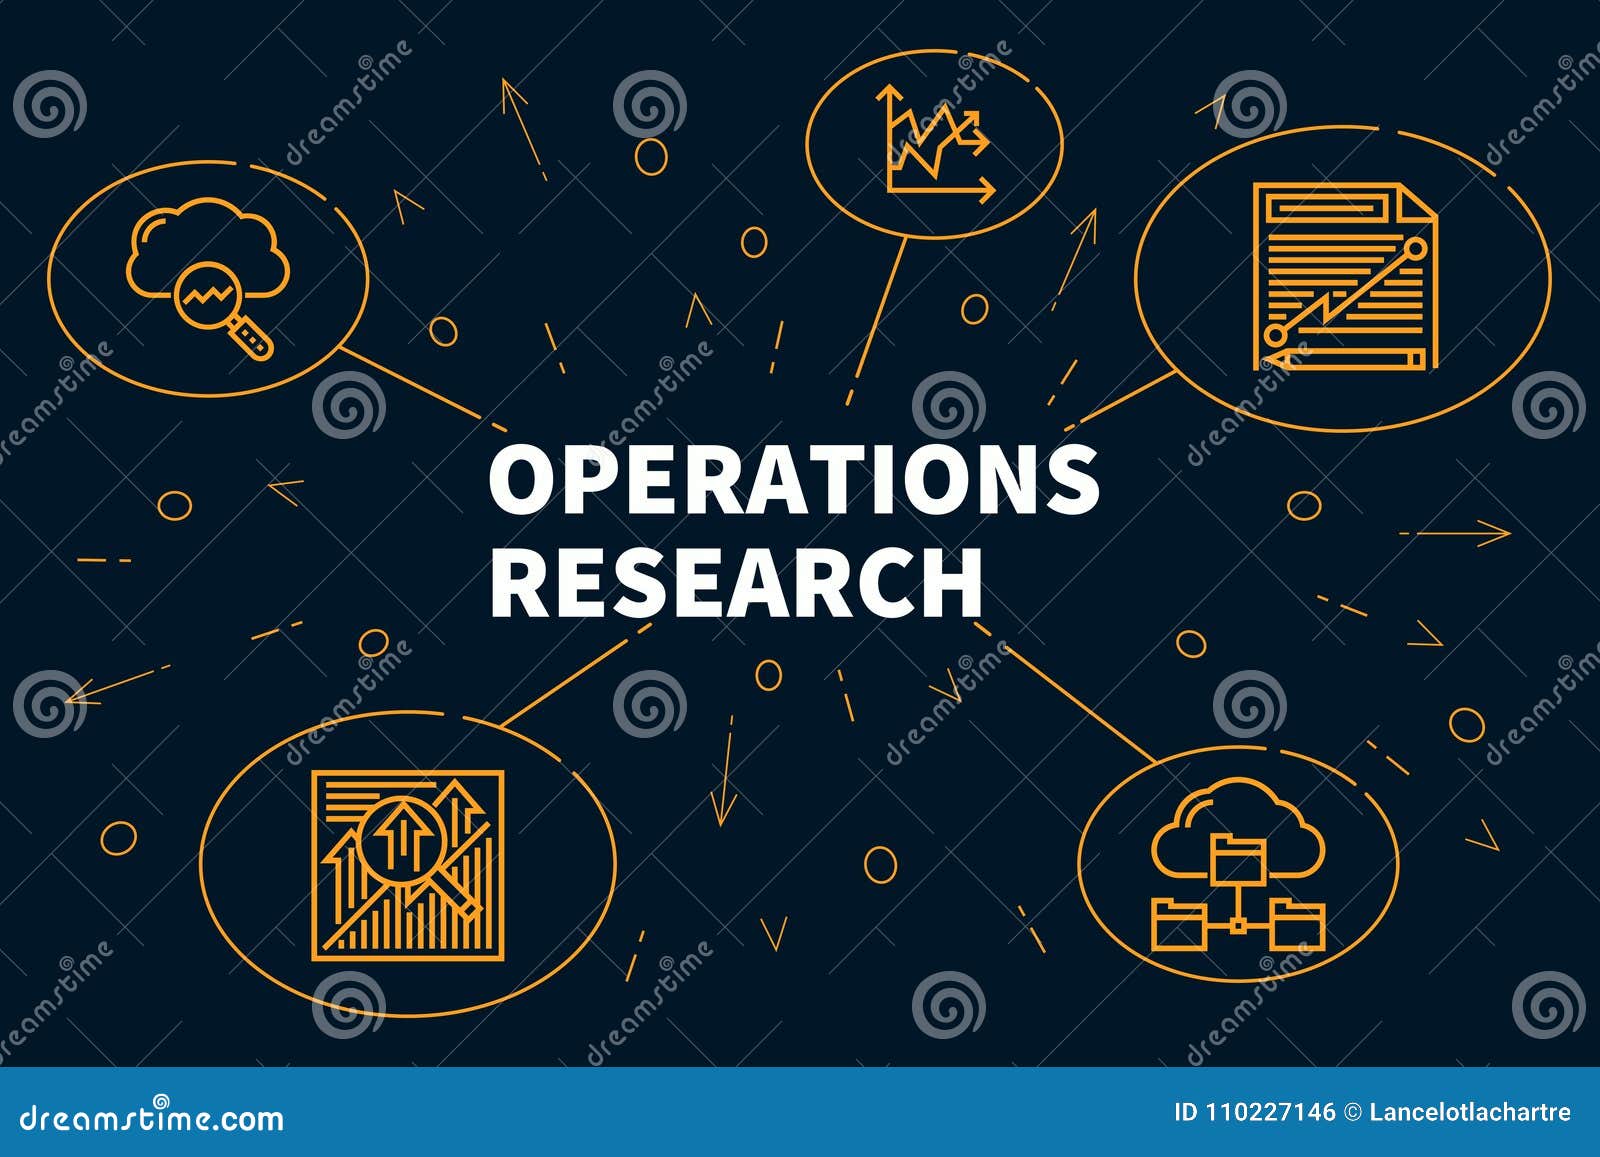 operational research consultants